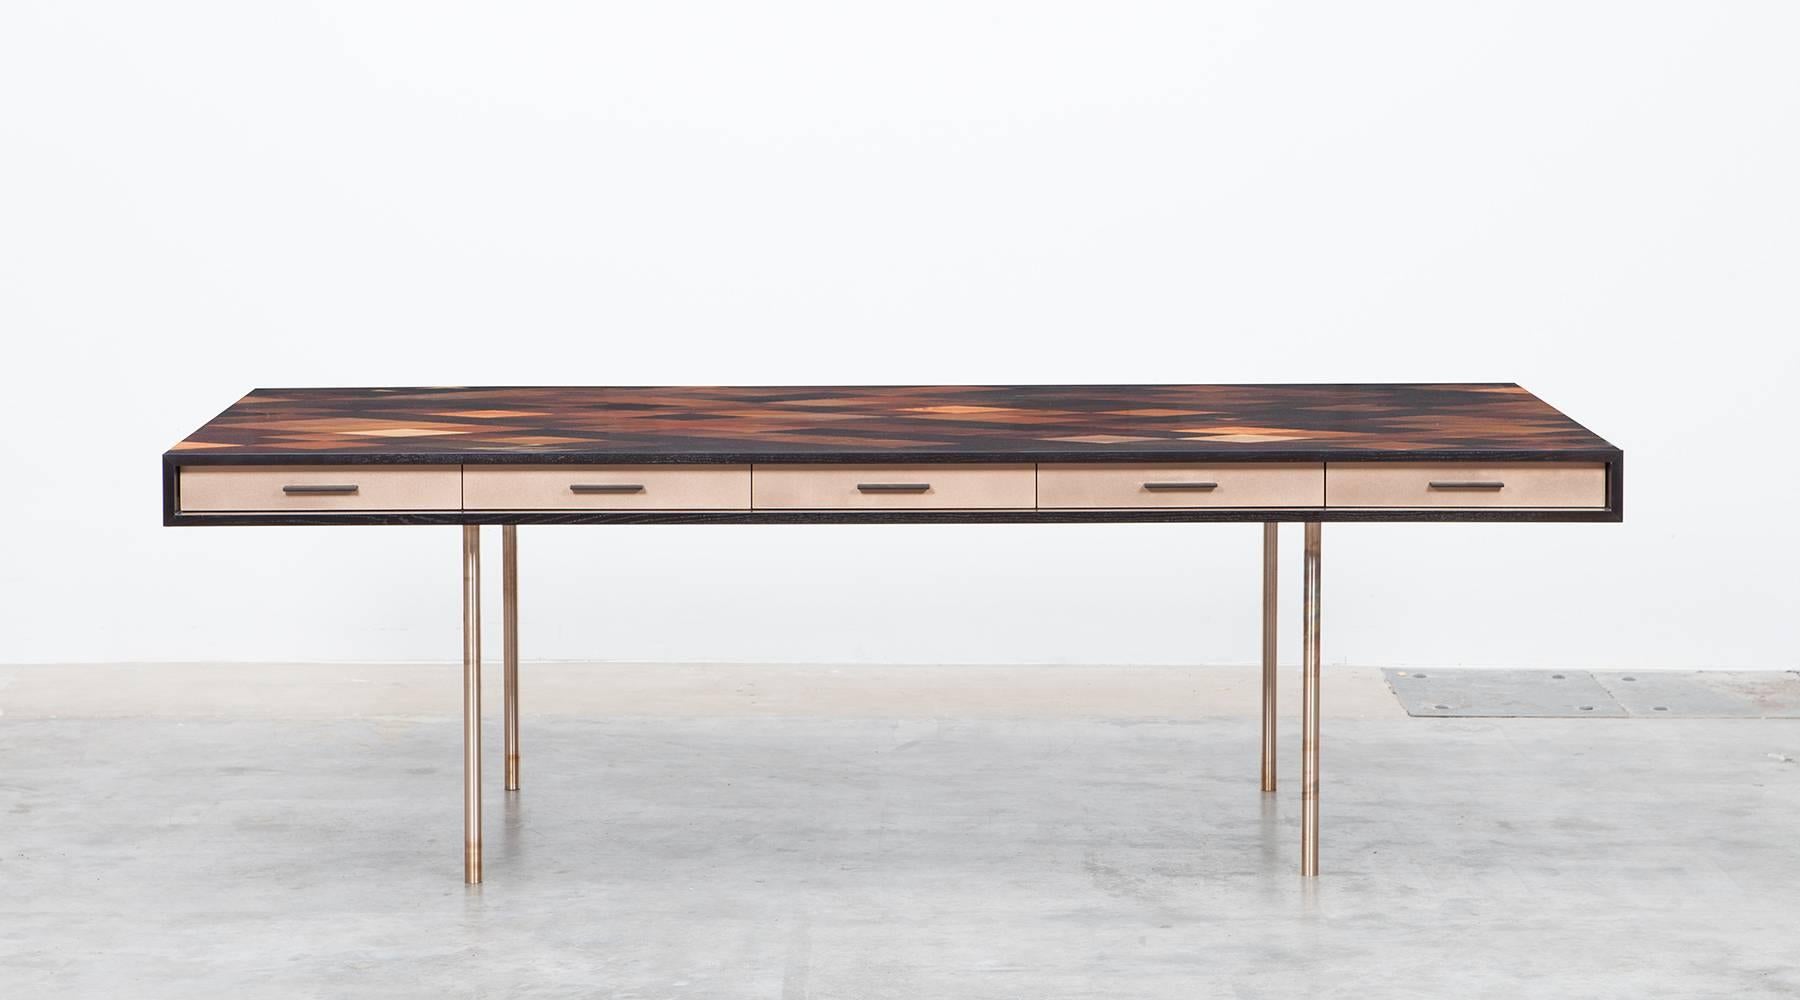 Desk by contemporary artist Johannes Hock, veneered tabletop in diamond pattern with thirty different types of wood. Five front drawers in bronze. Hidden access to electricity under the pattern which can be adjusted to personal taste. Similar